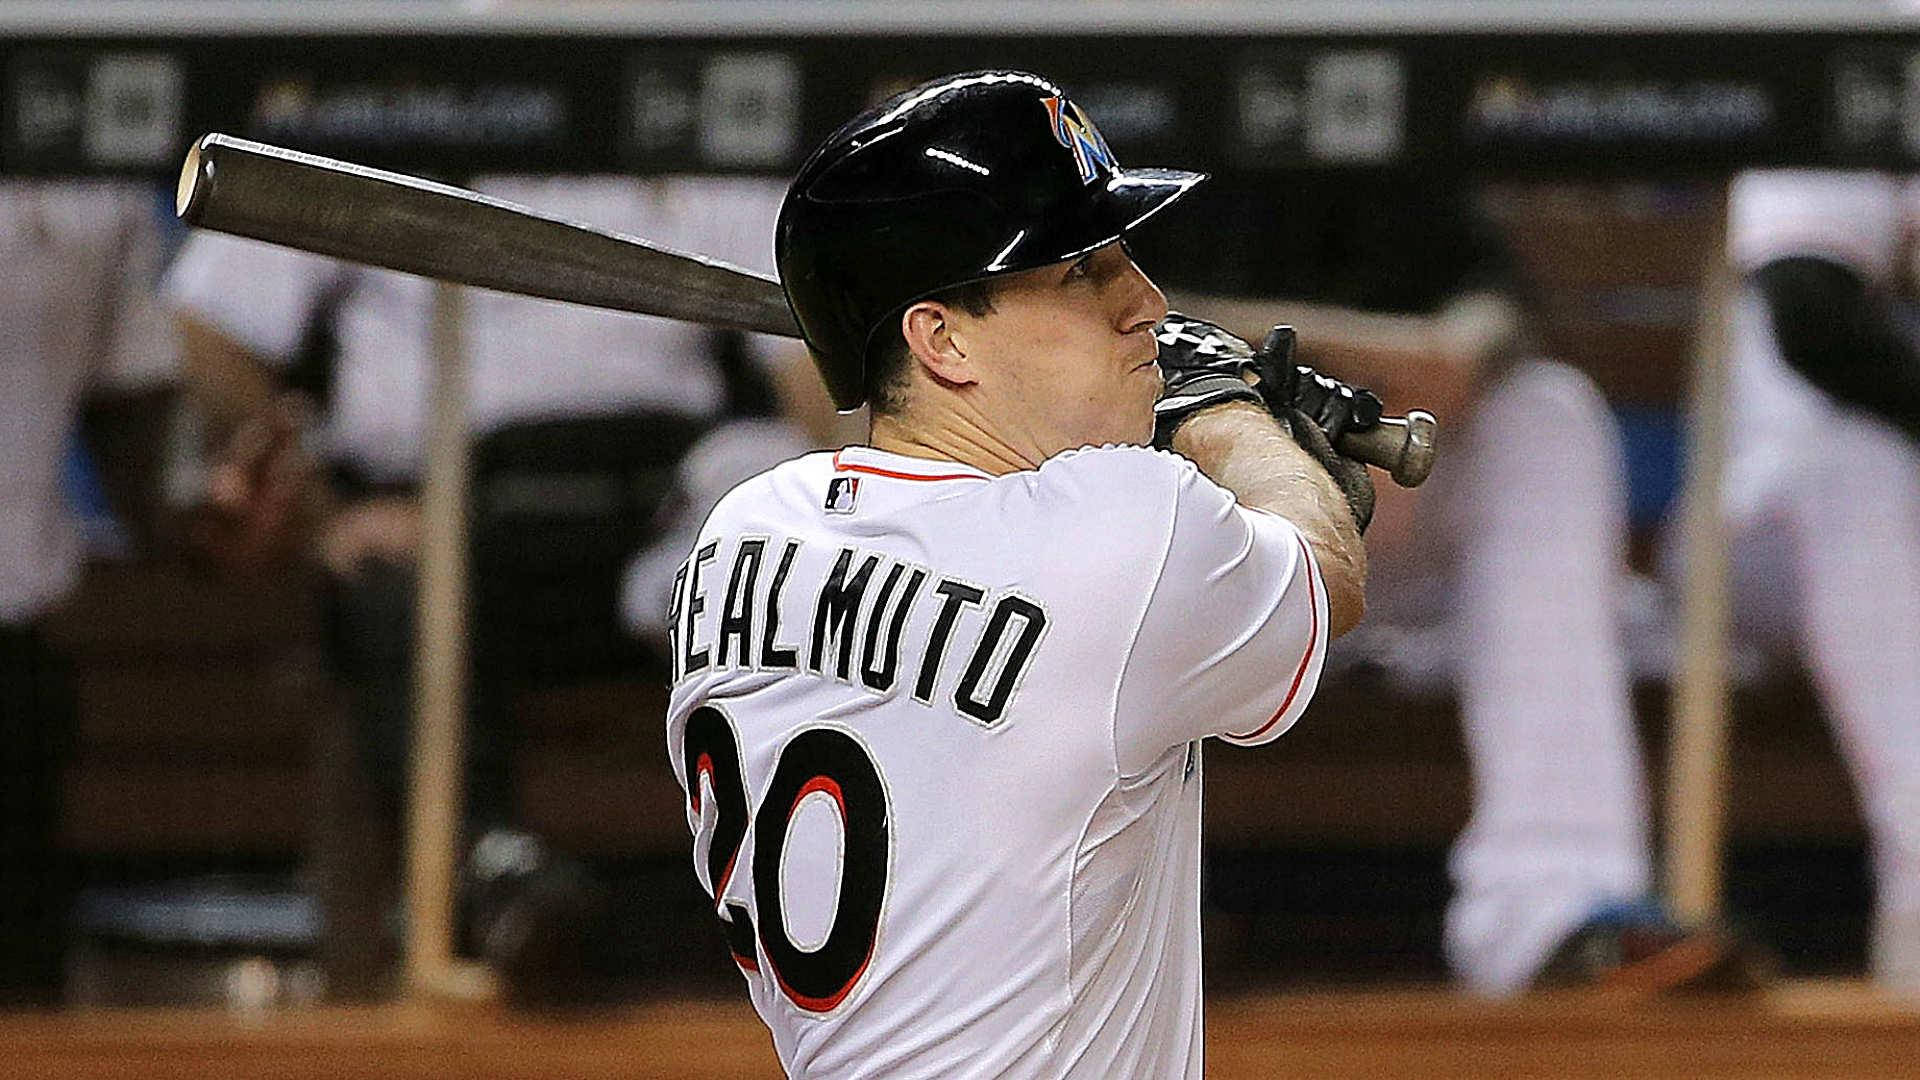 Jtrealmuto Anticipating The Ball - Jt Realmuto Förväntar Sig Bollen (on A Computer Or Mobile Wallpaper Featuring A Photo Of Jt Realmuto In Action) Wallpaper